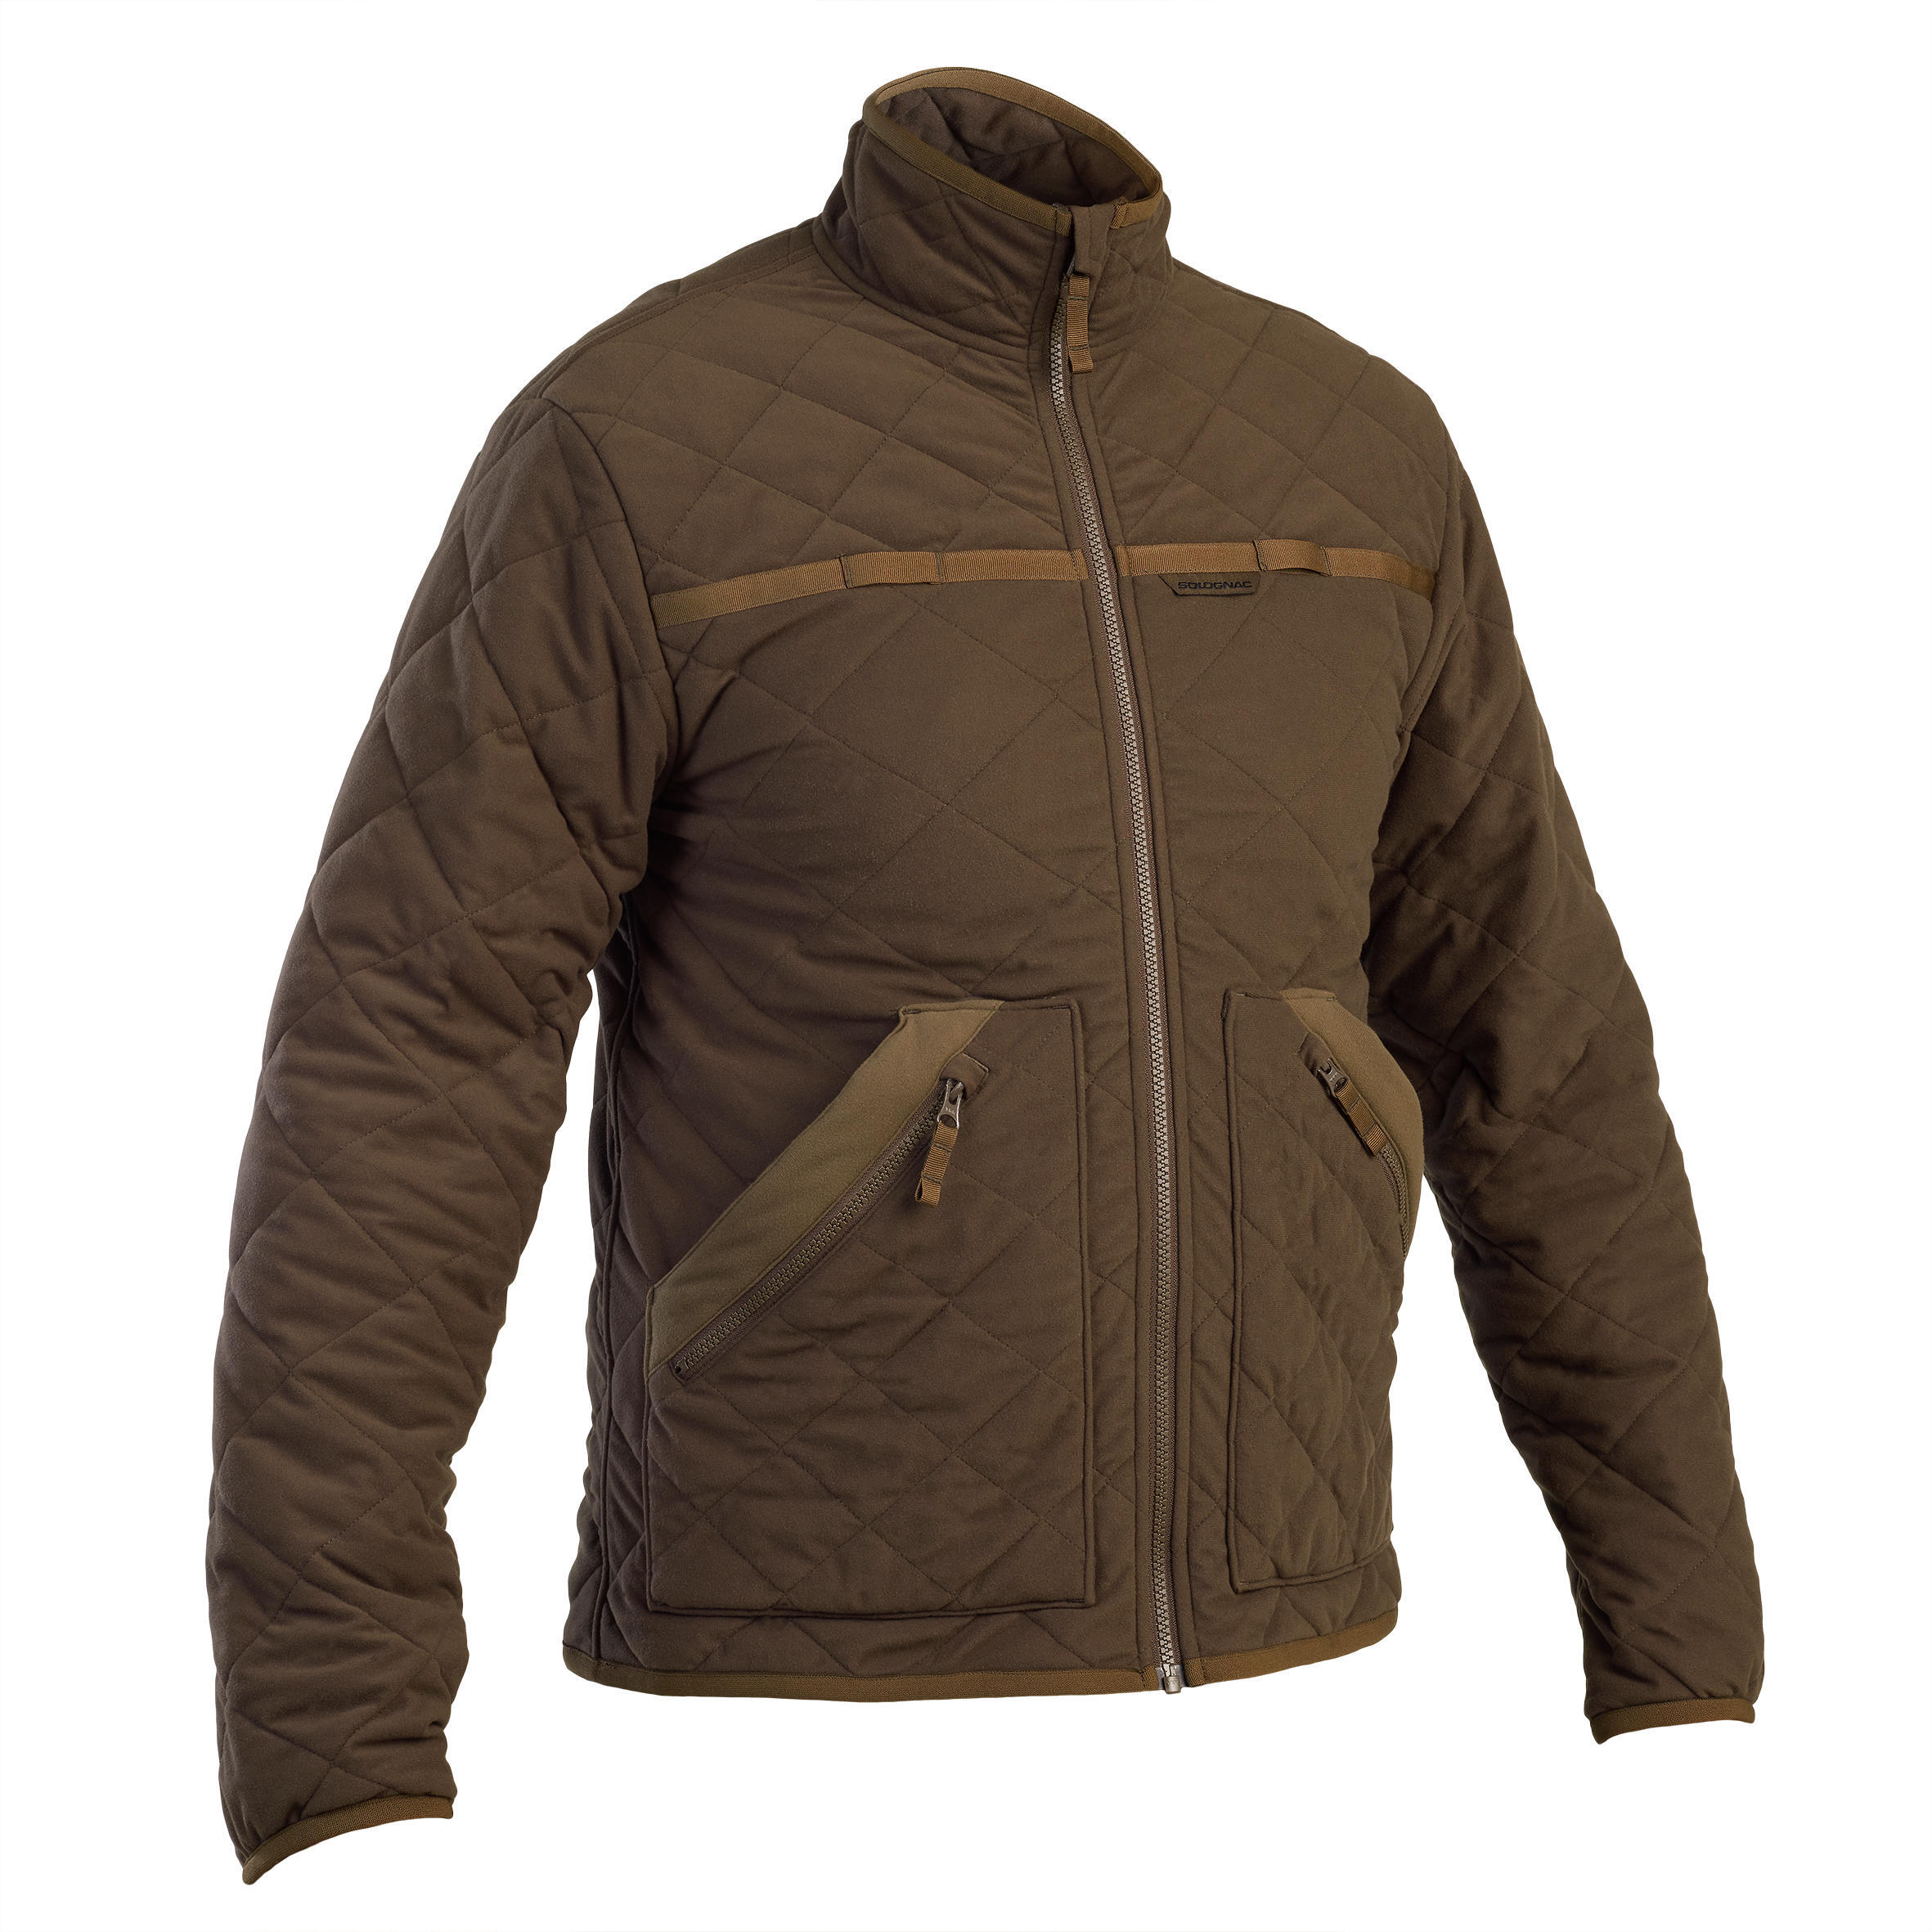 SOLOGNAC Silent padded jacket brown 500